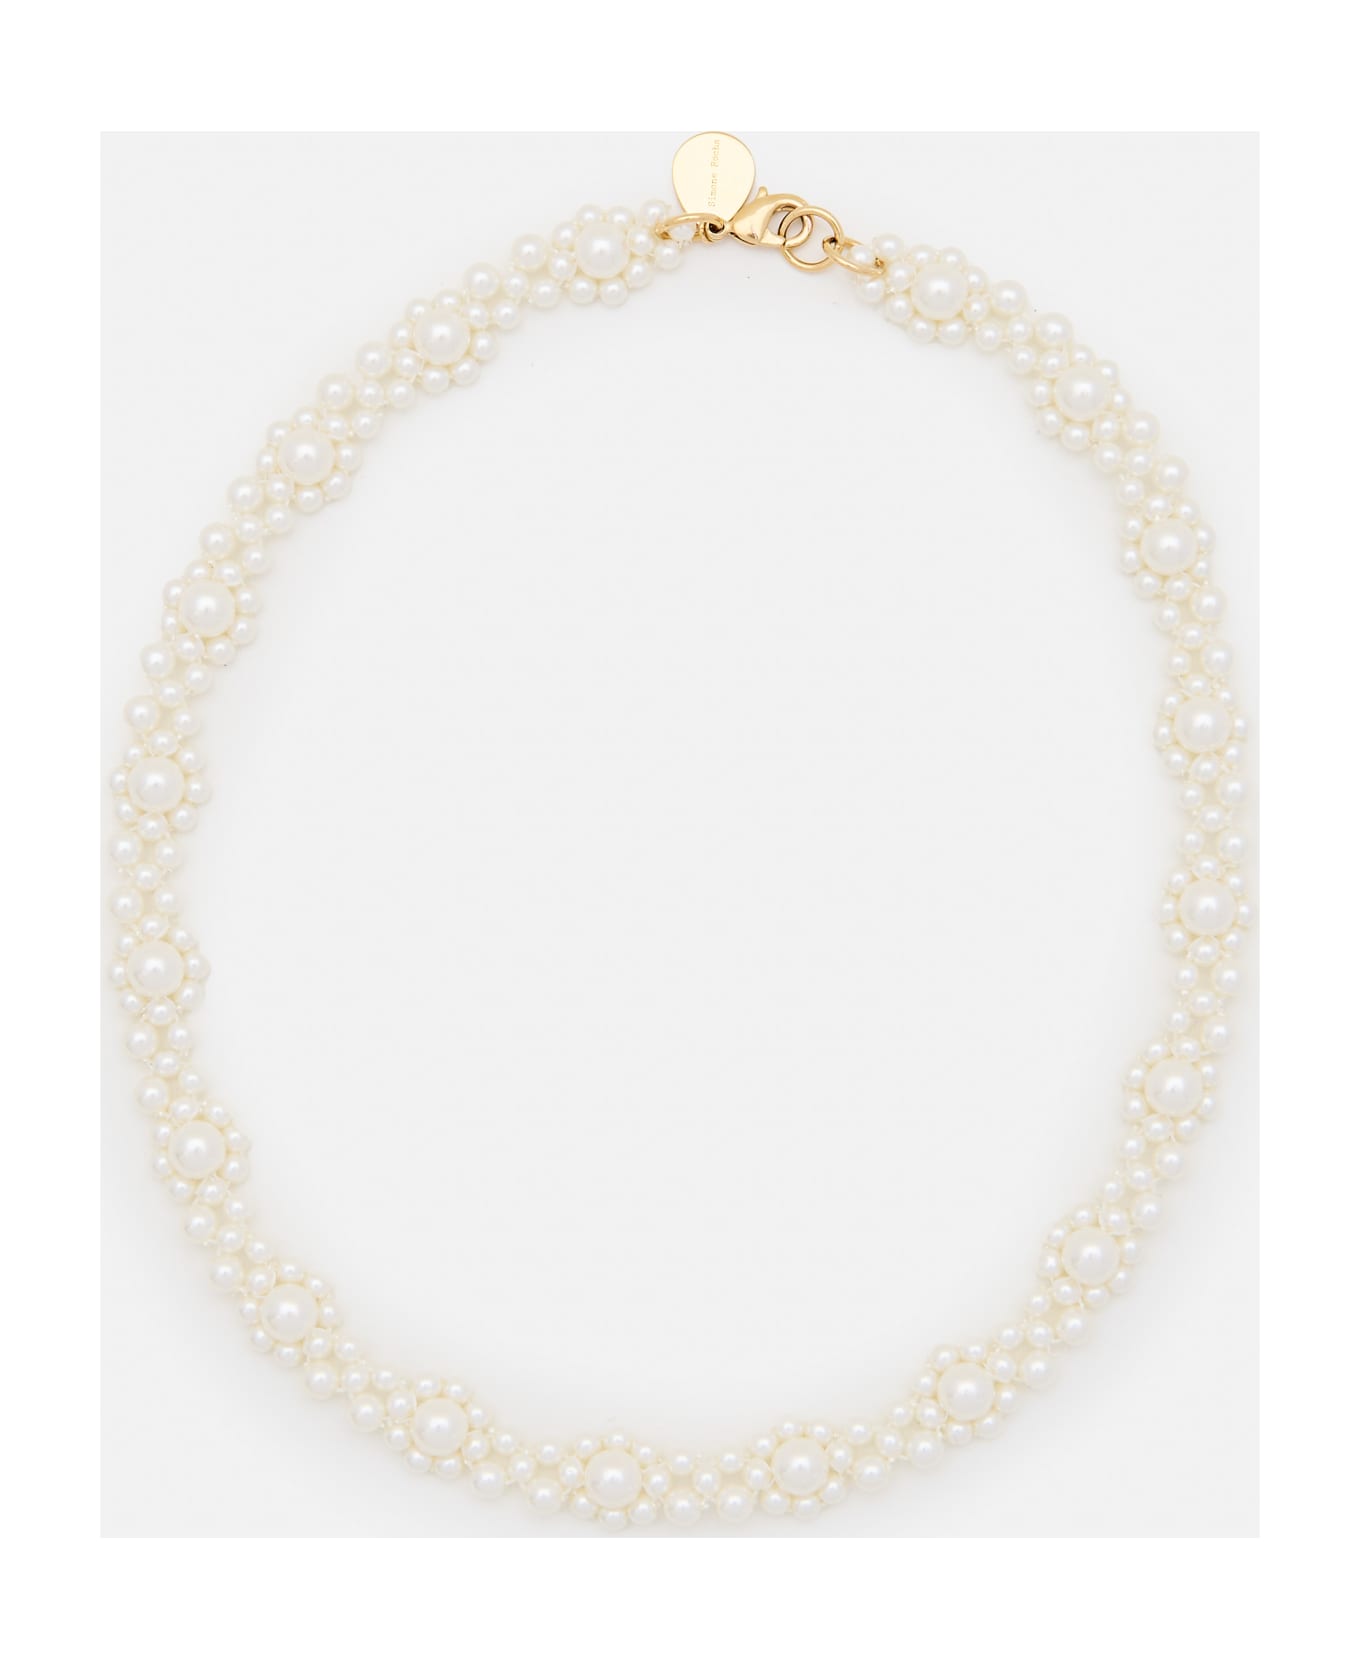 Simone Rocha Crystal Daisy Chain Necklace - White ネックレス